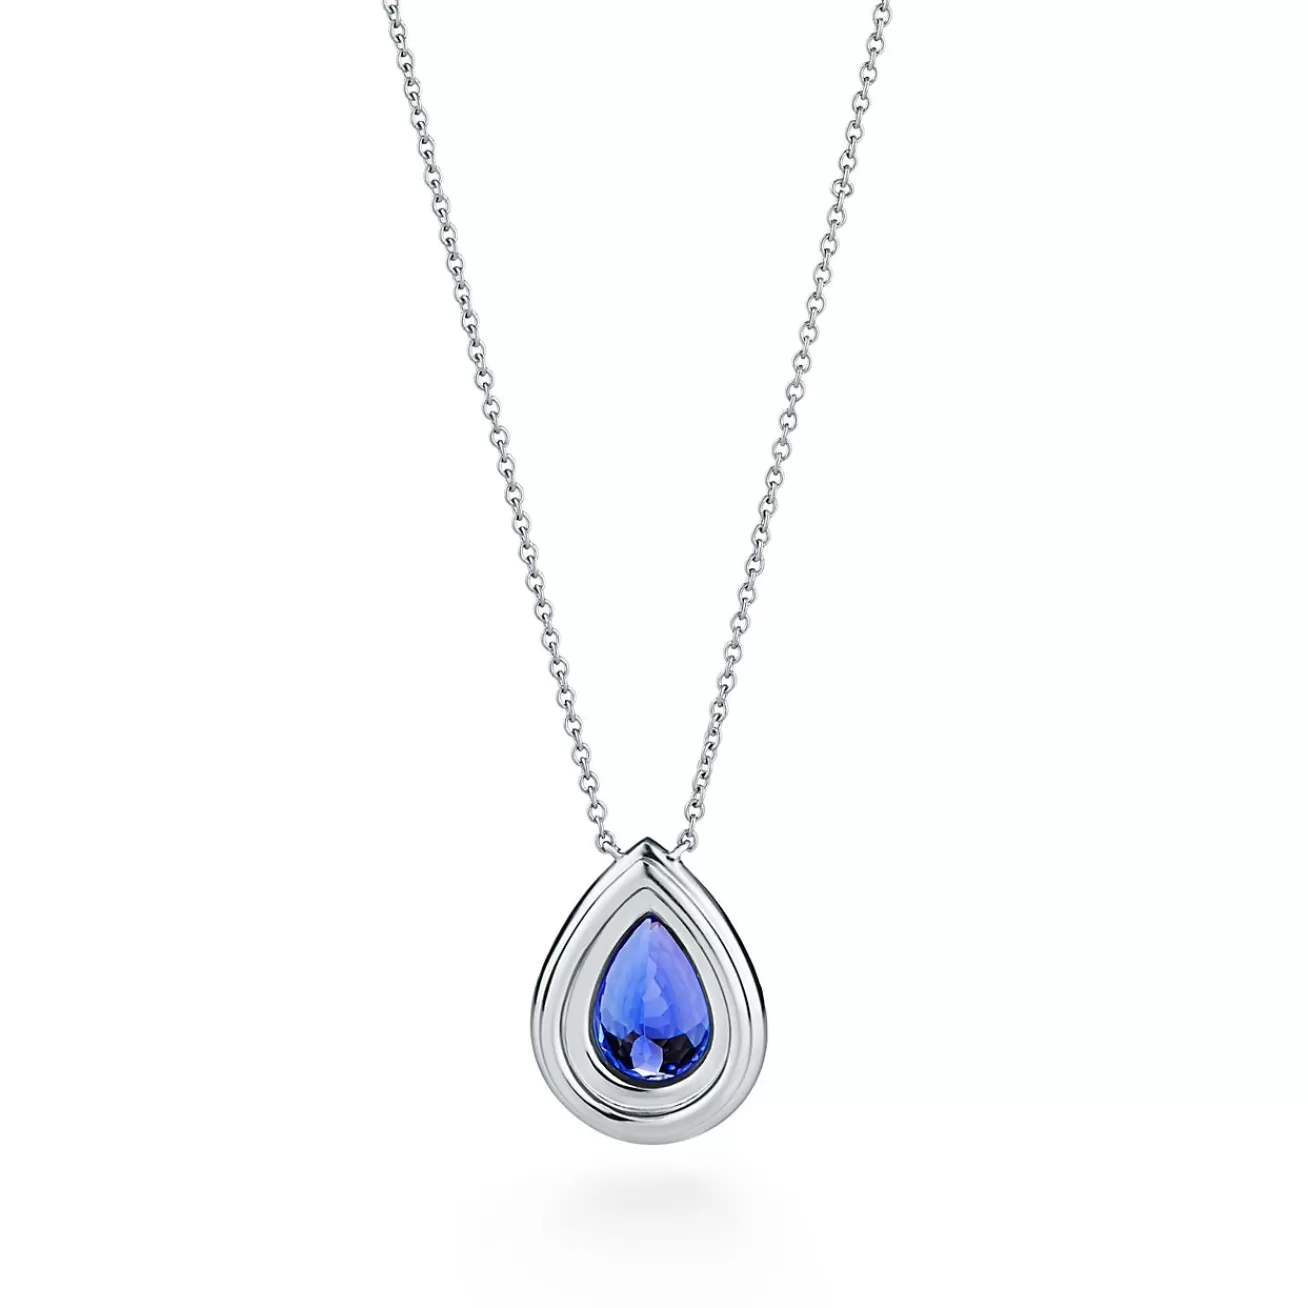 Tiffany & Co. Tiffany Soleste Pendant in platinum with a pear-shaped tanzanite. | ^ Necklaces & Pendants | Platinum Jewelry